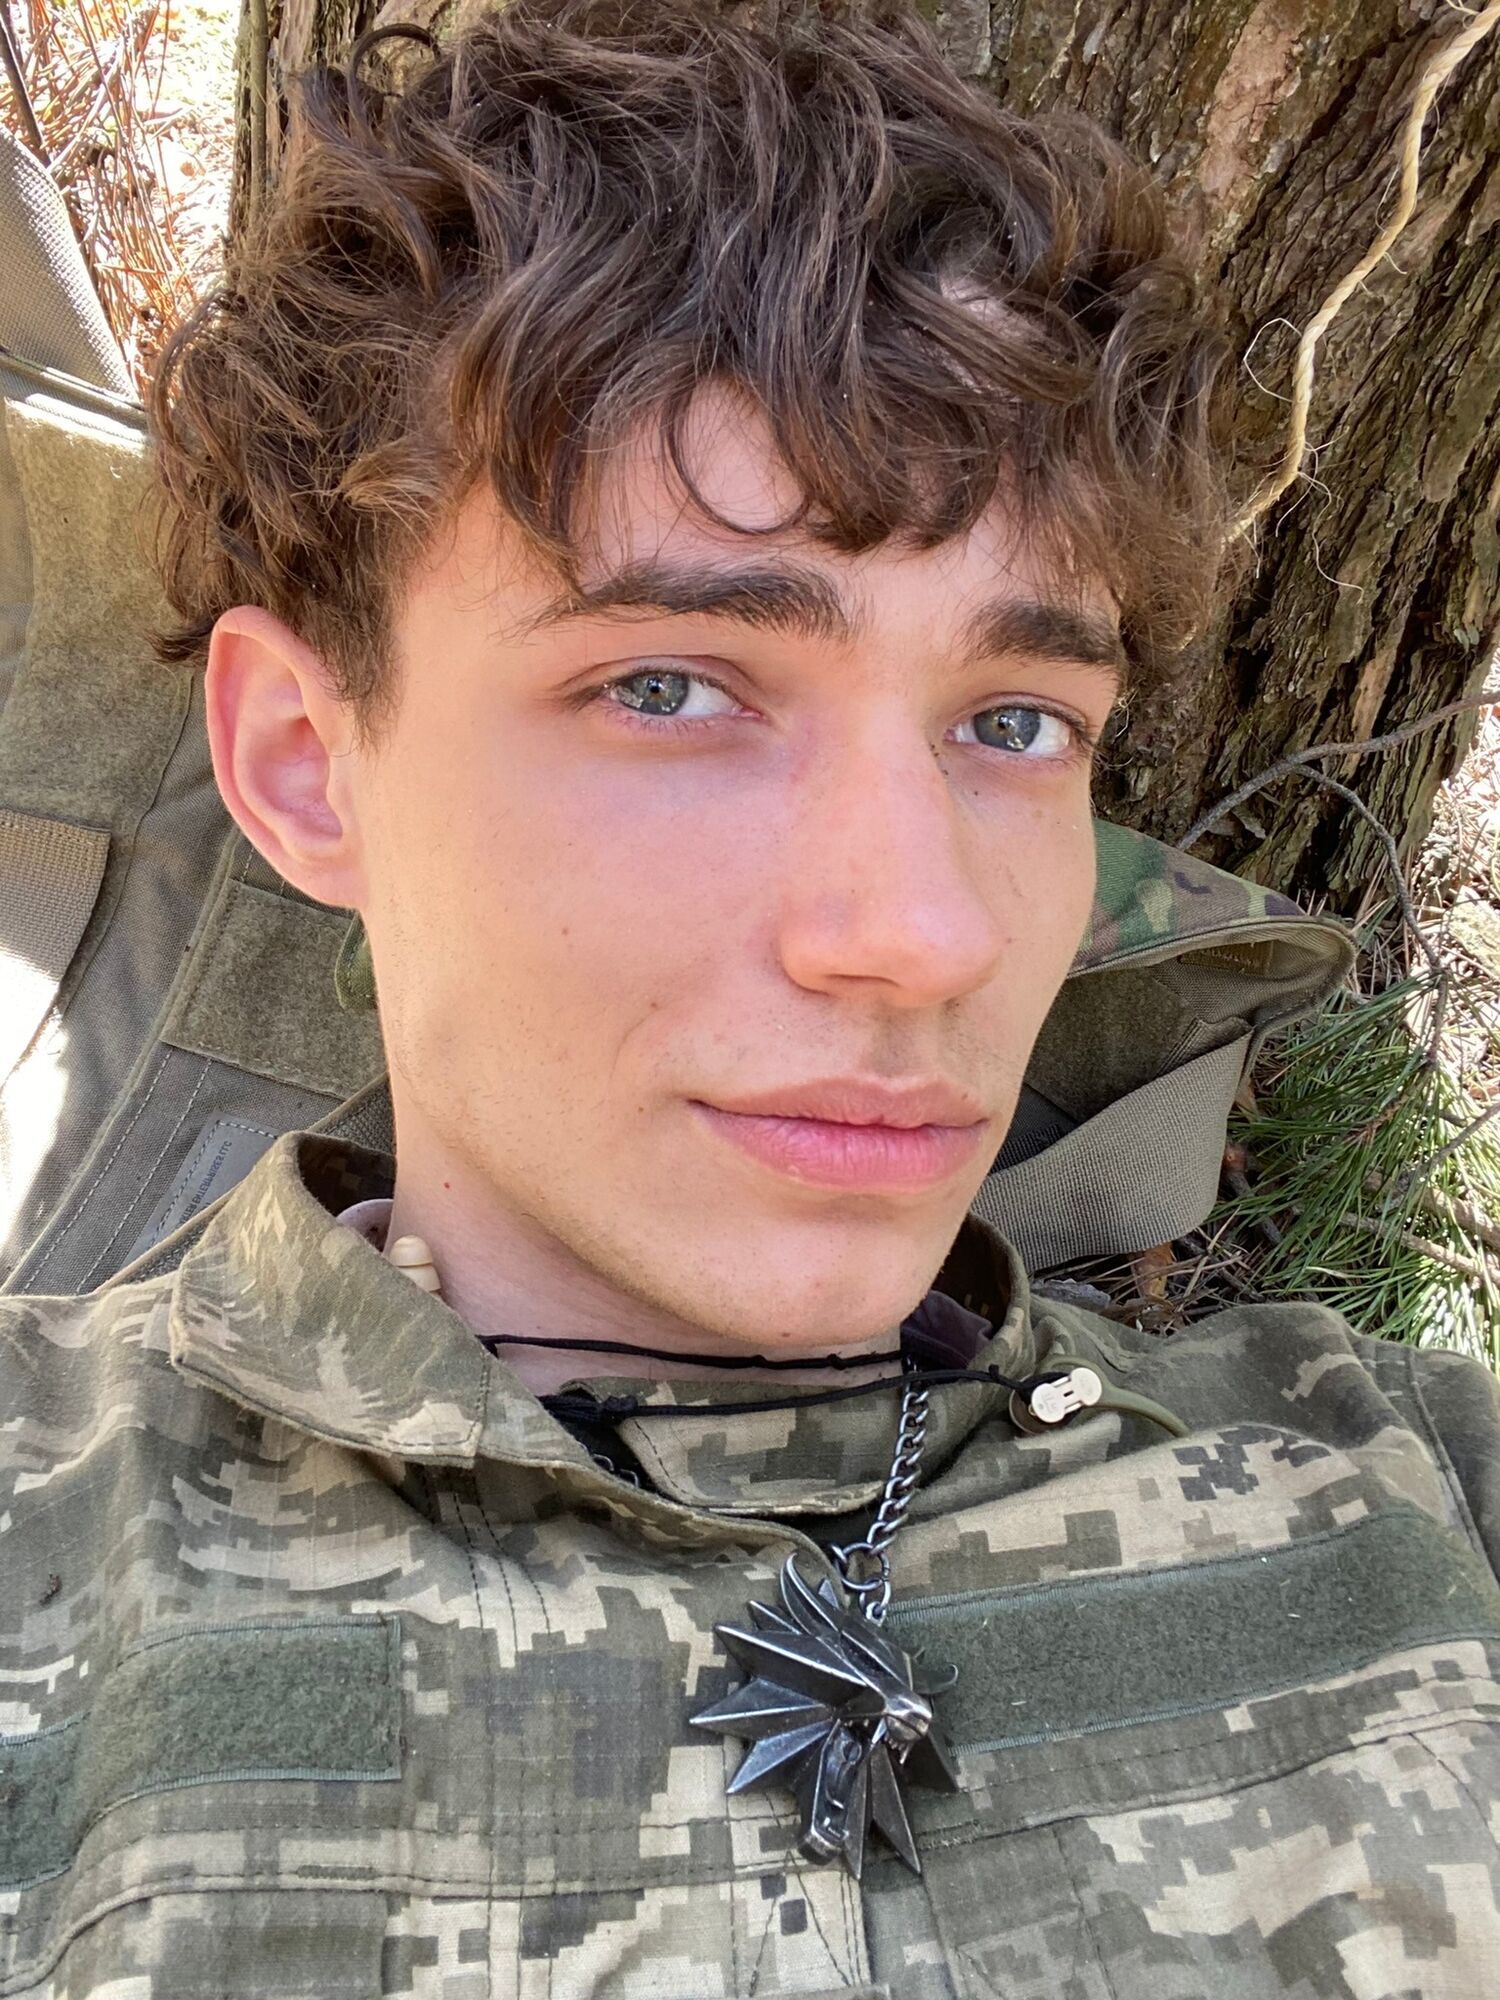 ''Only a miracle could have saved me'': the network was struck by the farewell note of a 22-year-old Frenchman who died in the fighting for Ukraine. Photo